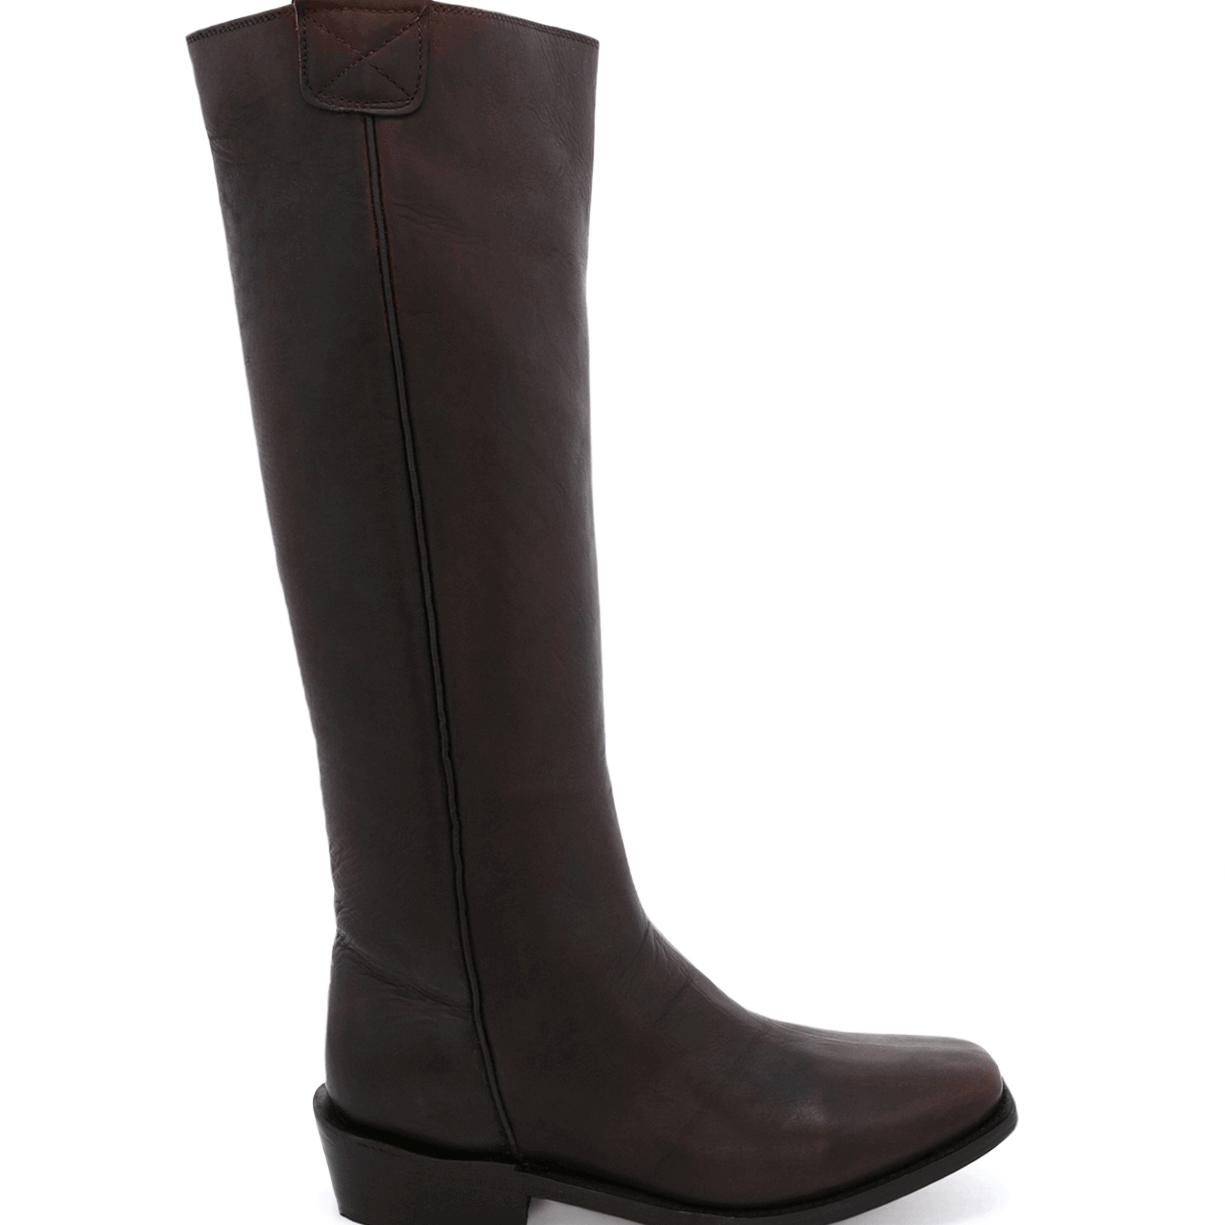 An Oak Tree Farms Pale Rider women's brown leather riding boot on a black background.